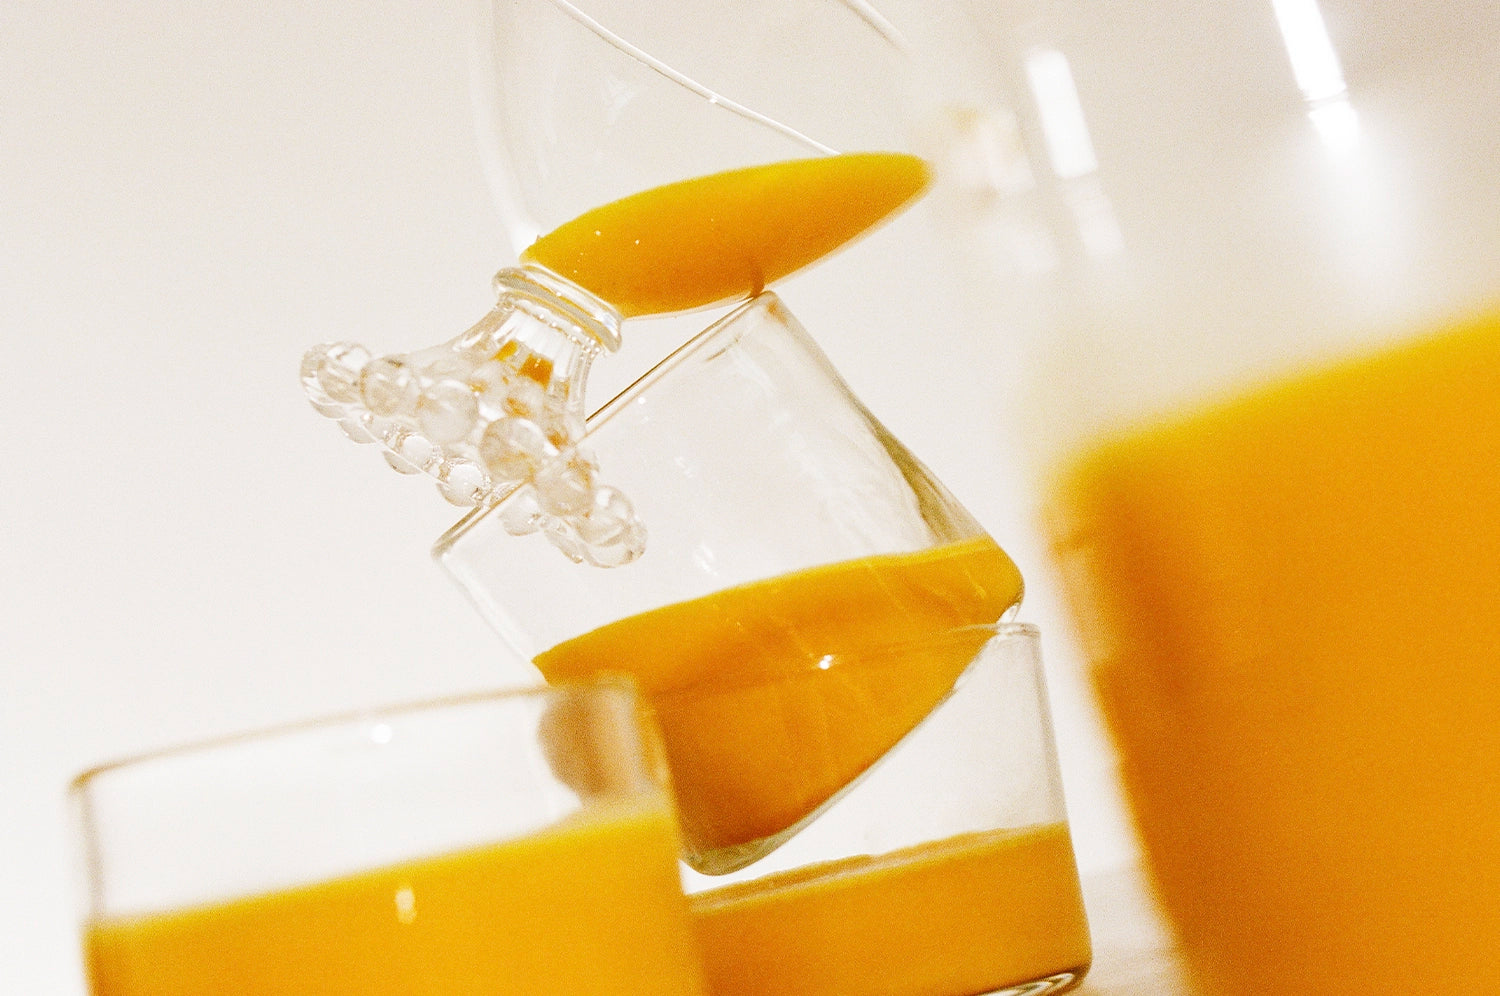 A close-up of orange saffron beverage from The Fullest being poured from a glass jug into a glass, with another full glass visible in the foreground.